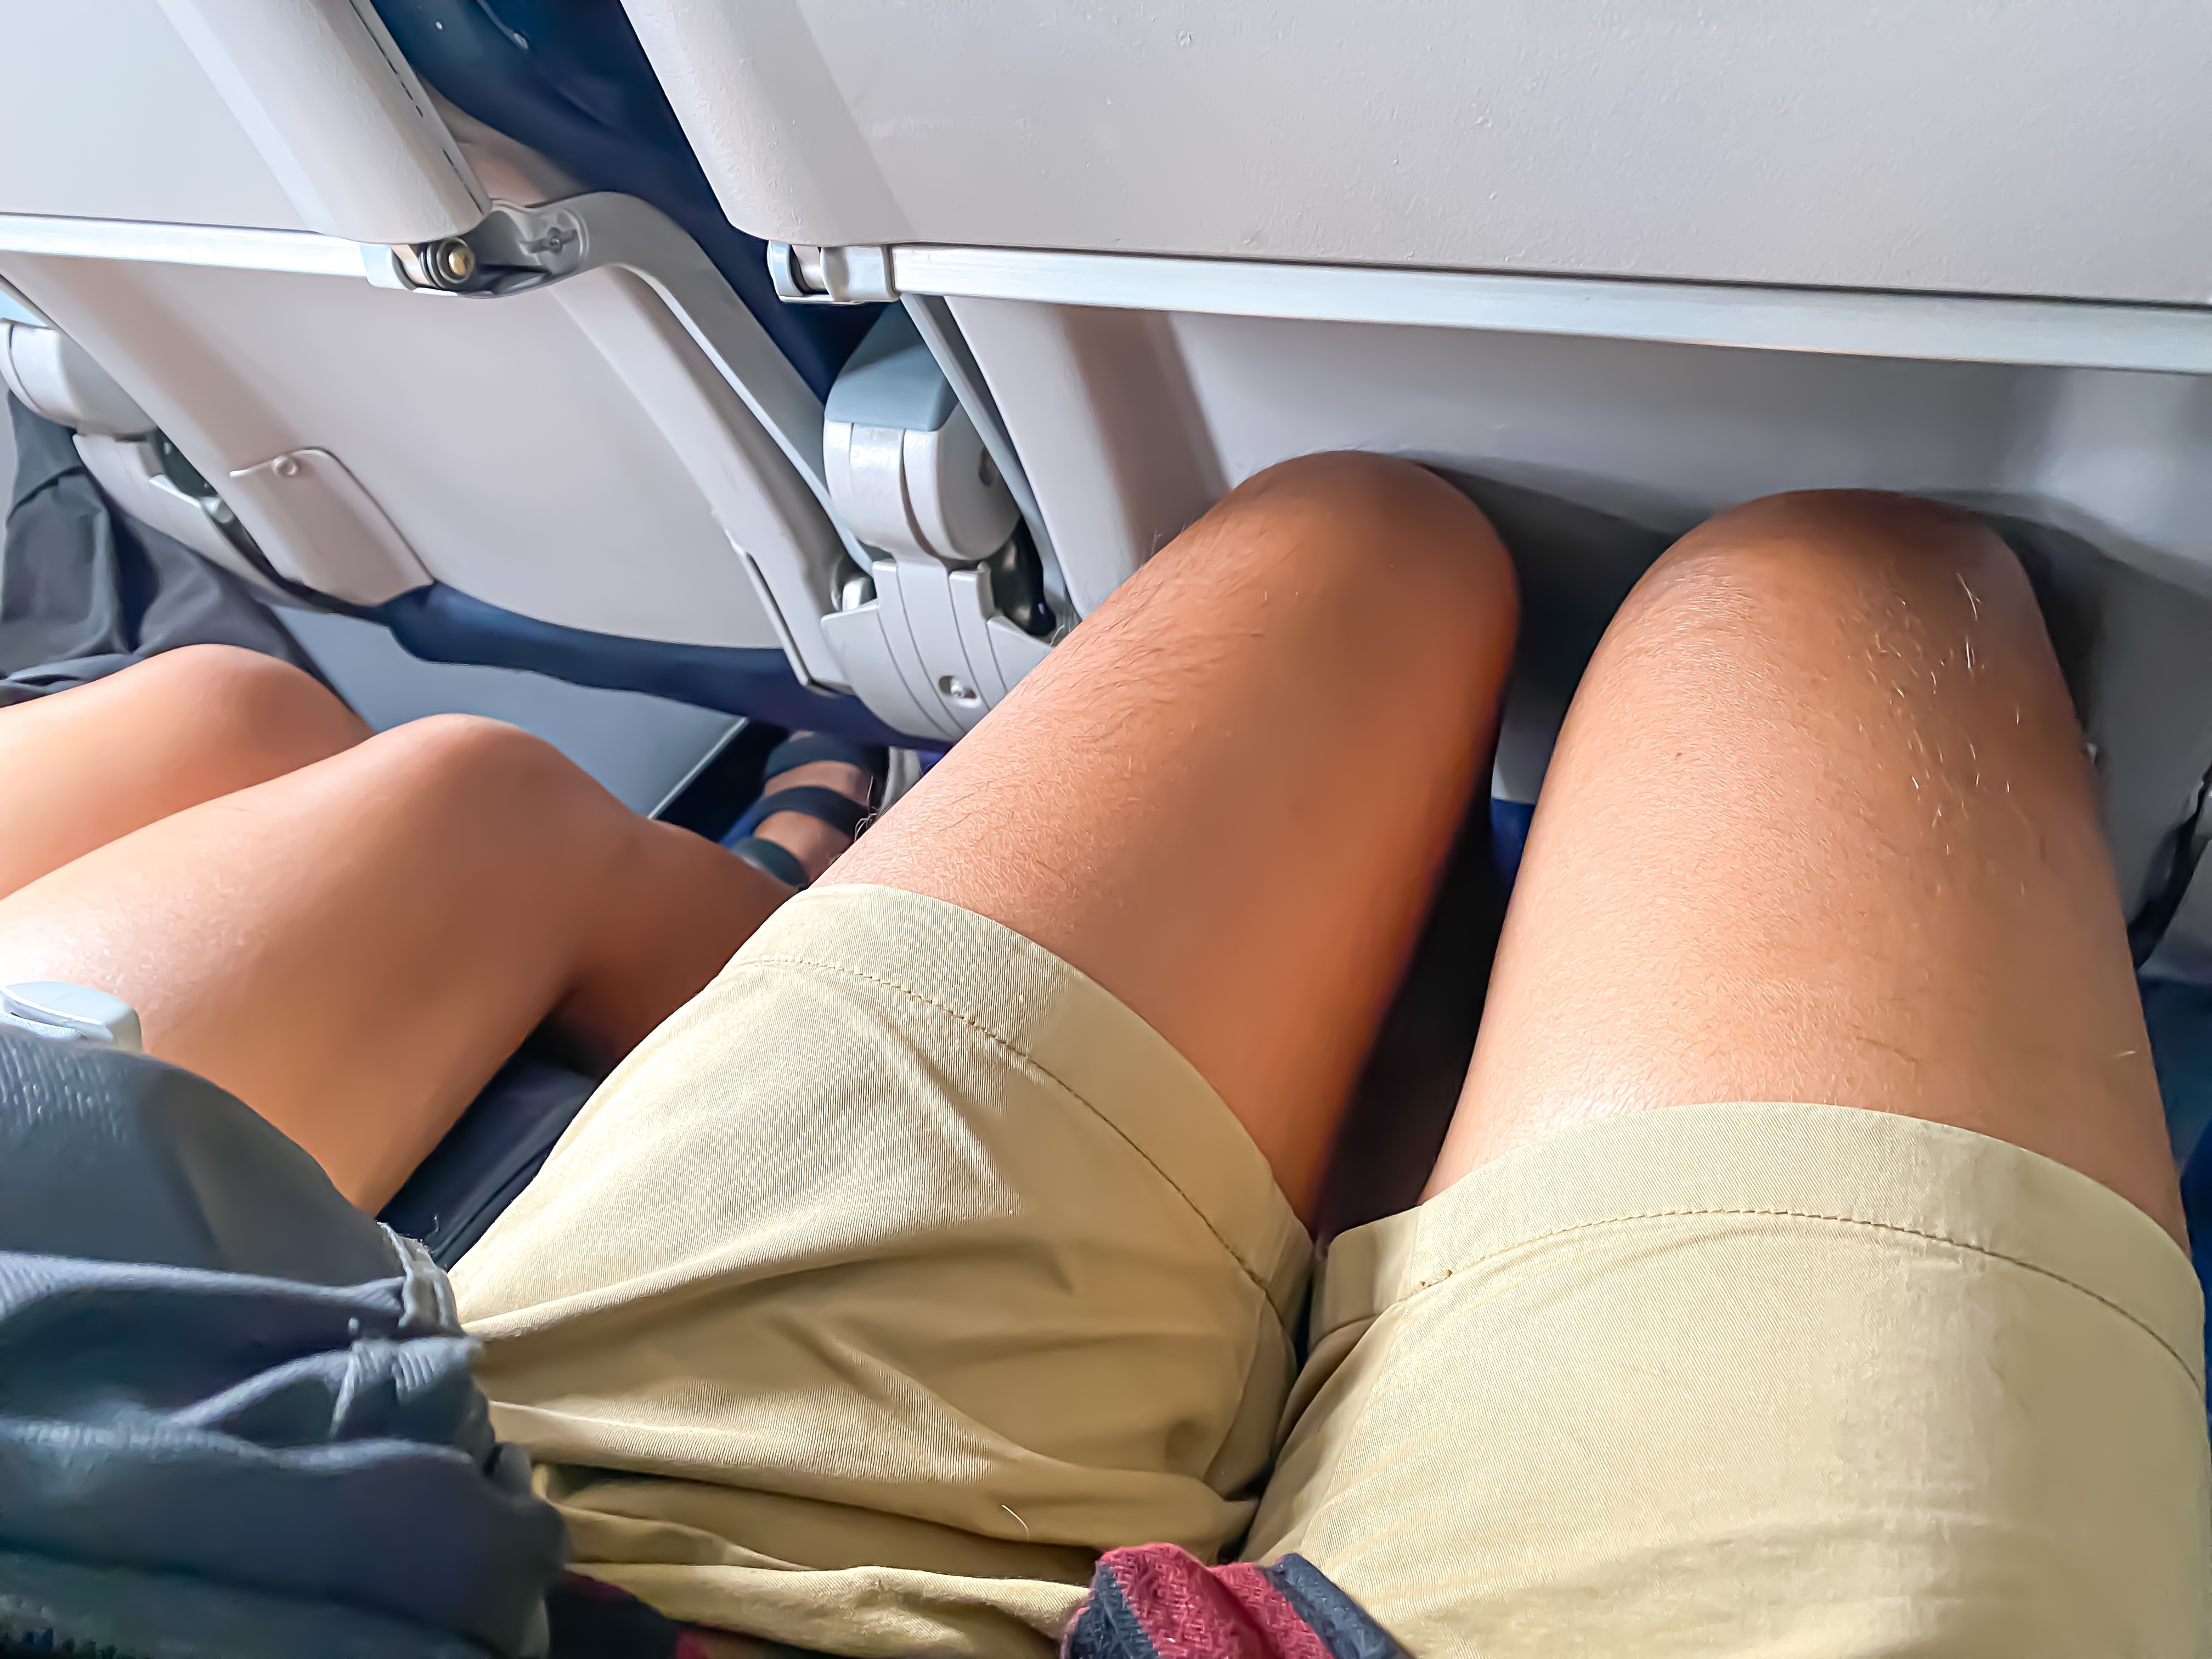 Legs of people sitting together during a flight | Source: Shutterstock